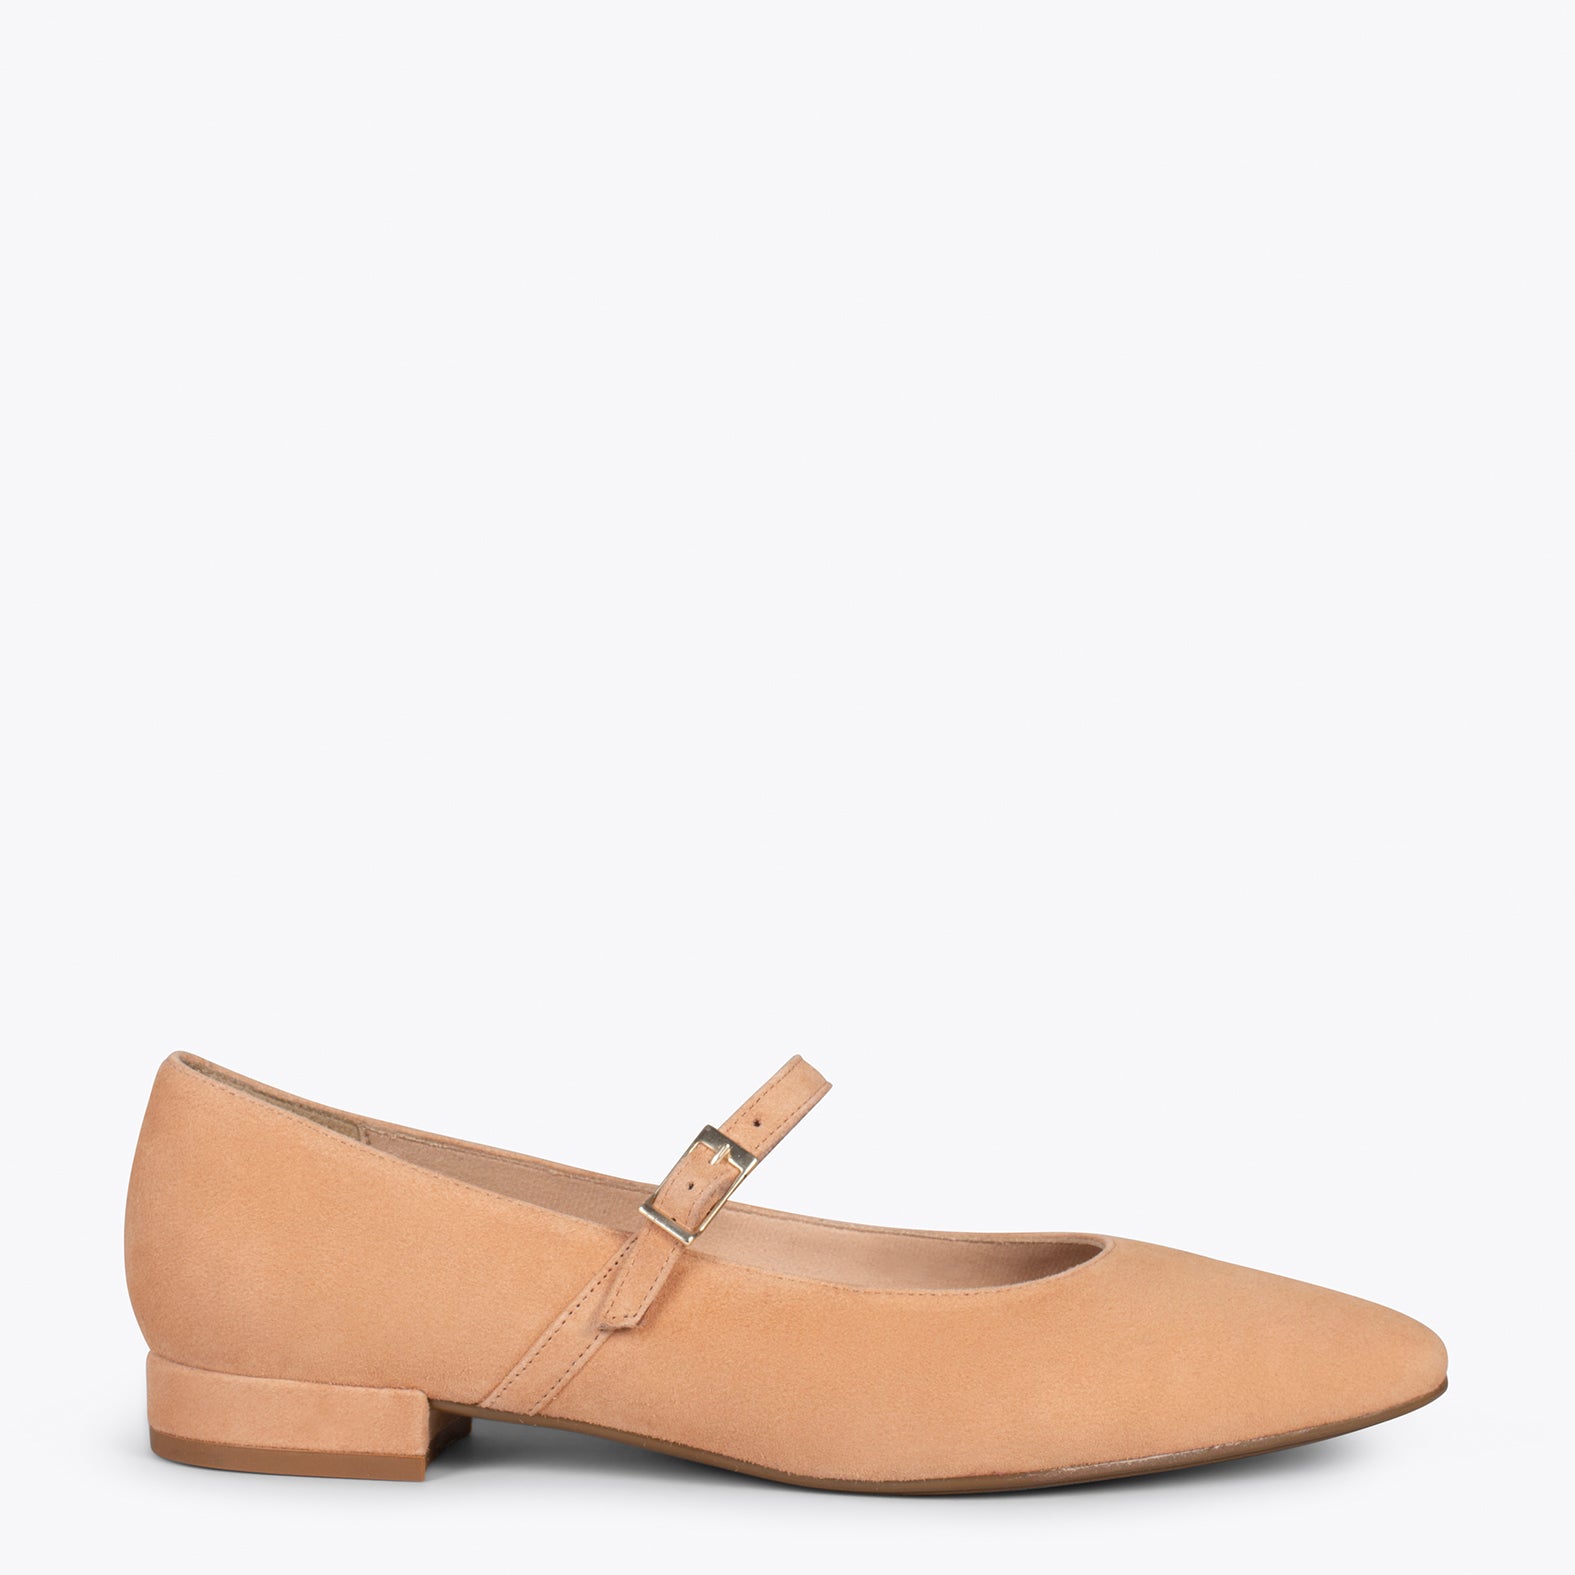 MARY-JANE – SAND buckled leather flats